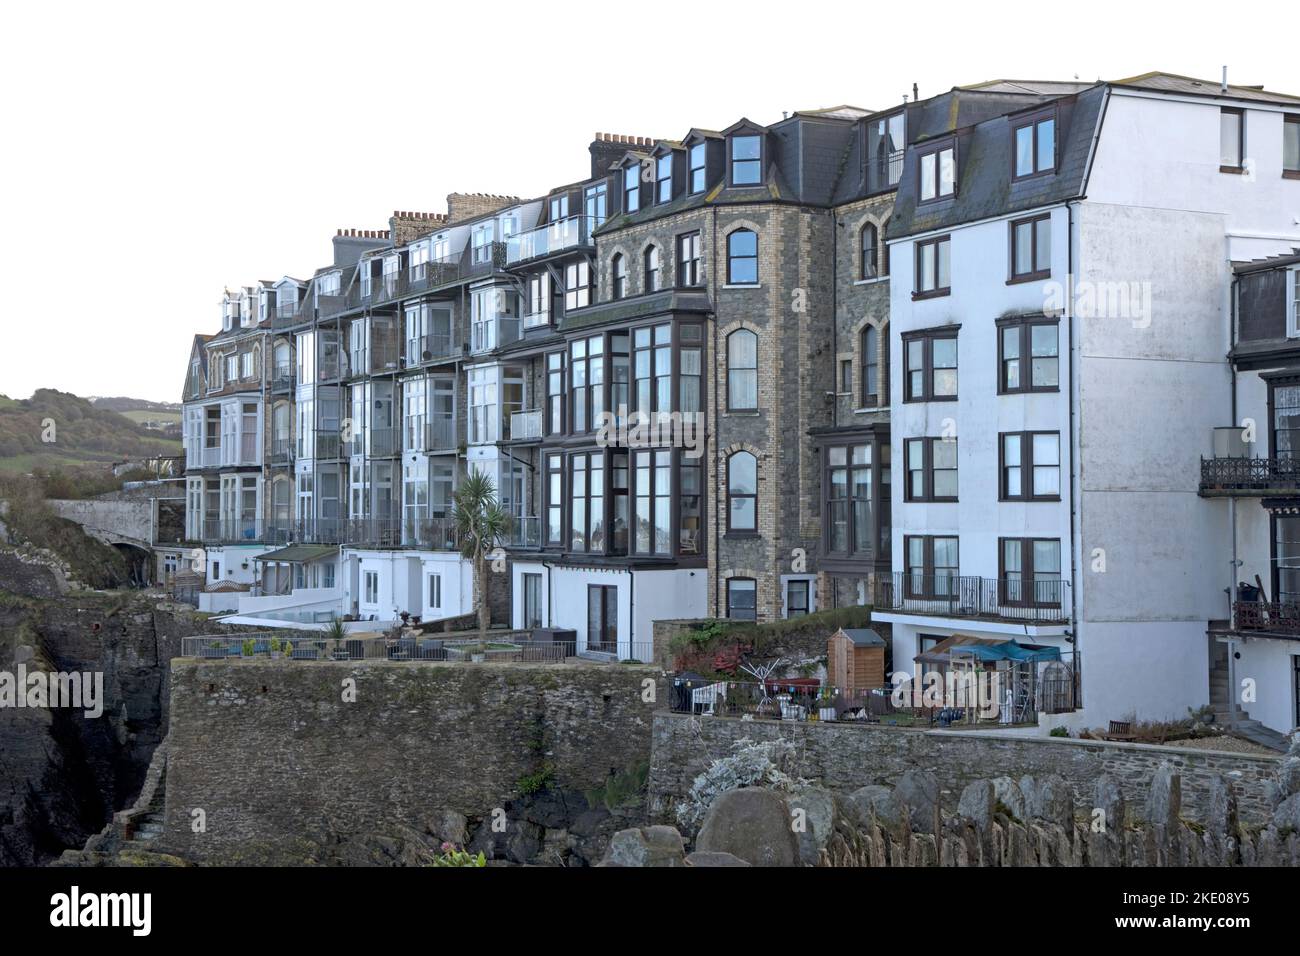 Residential apartments built on rock outcrops Ilfracombe Stock Photo